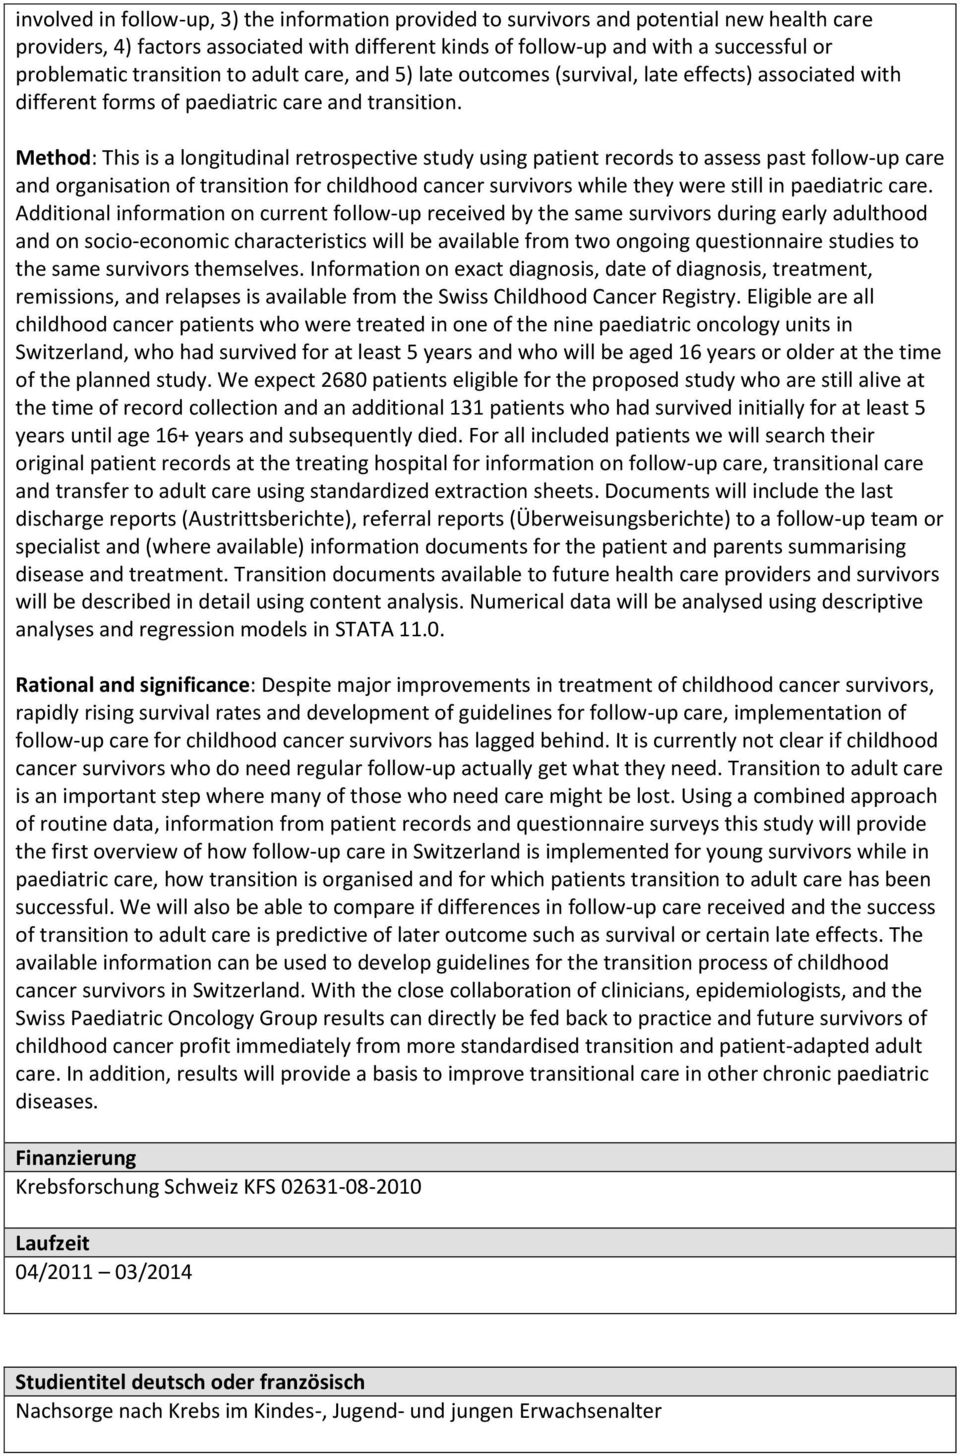 Method: This is a longitudinal retrospective study using patient records to assess past follow-up care and organisation of transition for childhood cancer survivors while they were still in